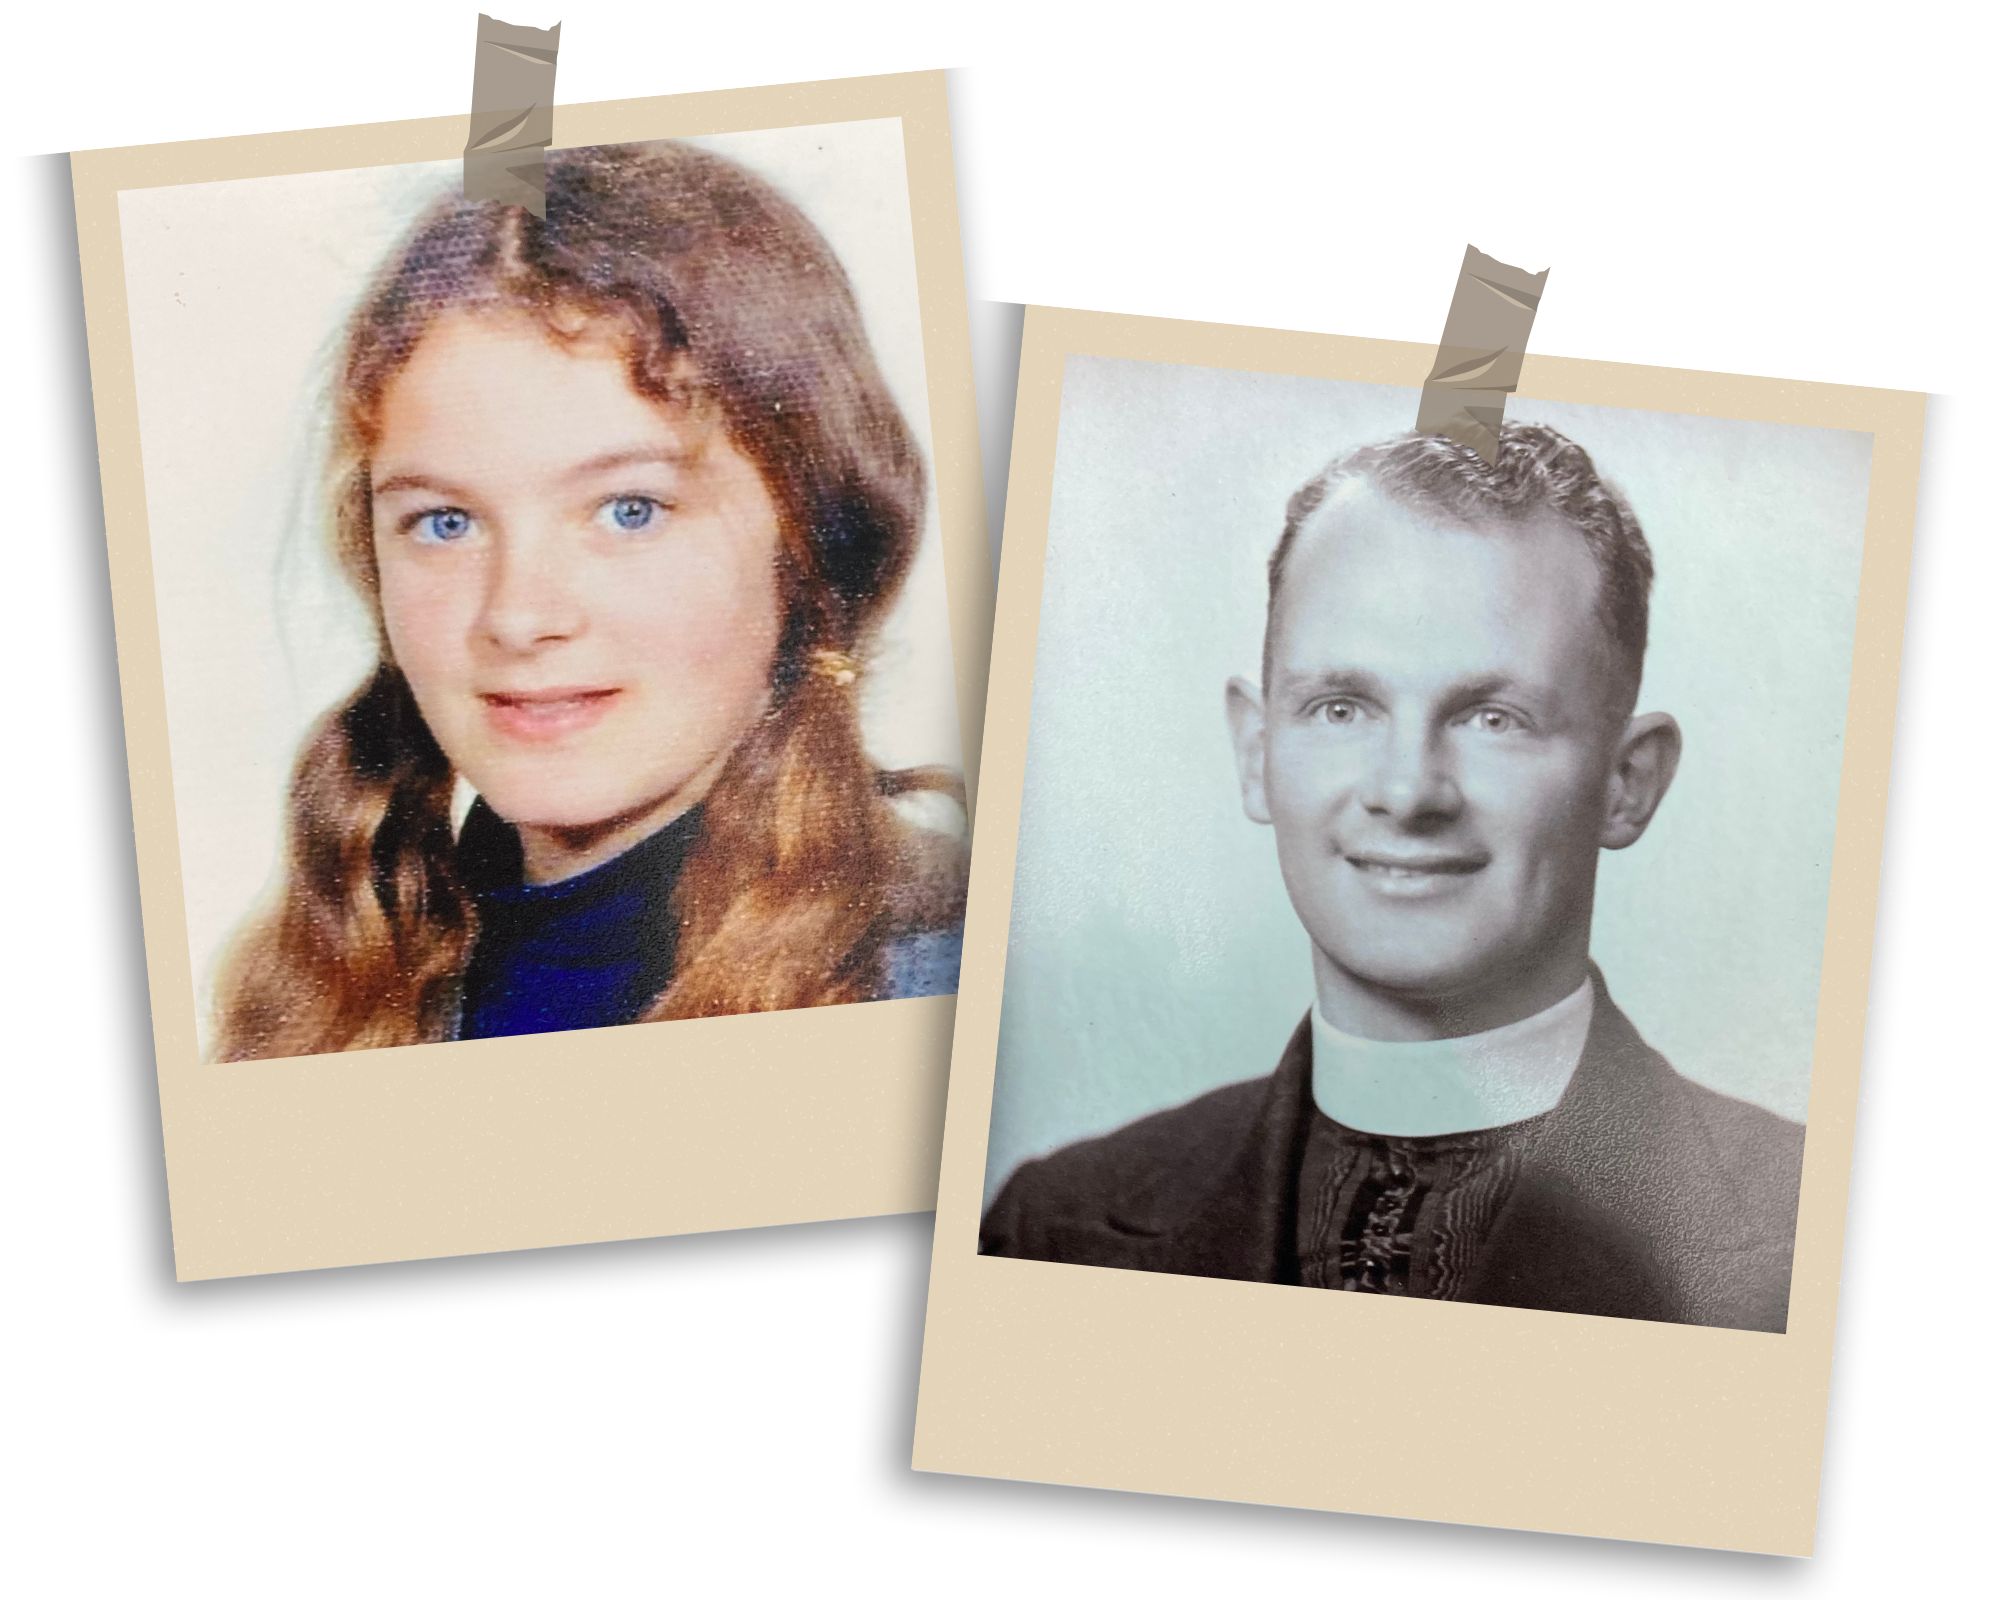 Polaroid style photos of a girl with brown hair in pigtails and a young male priest in a clerical collar